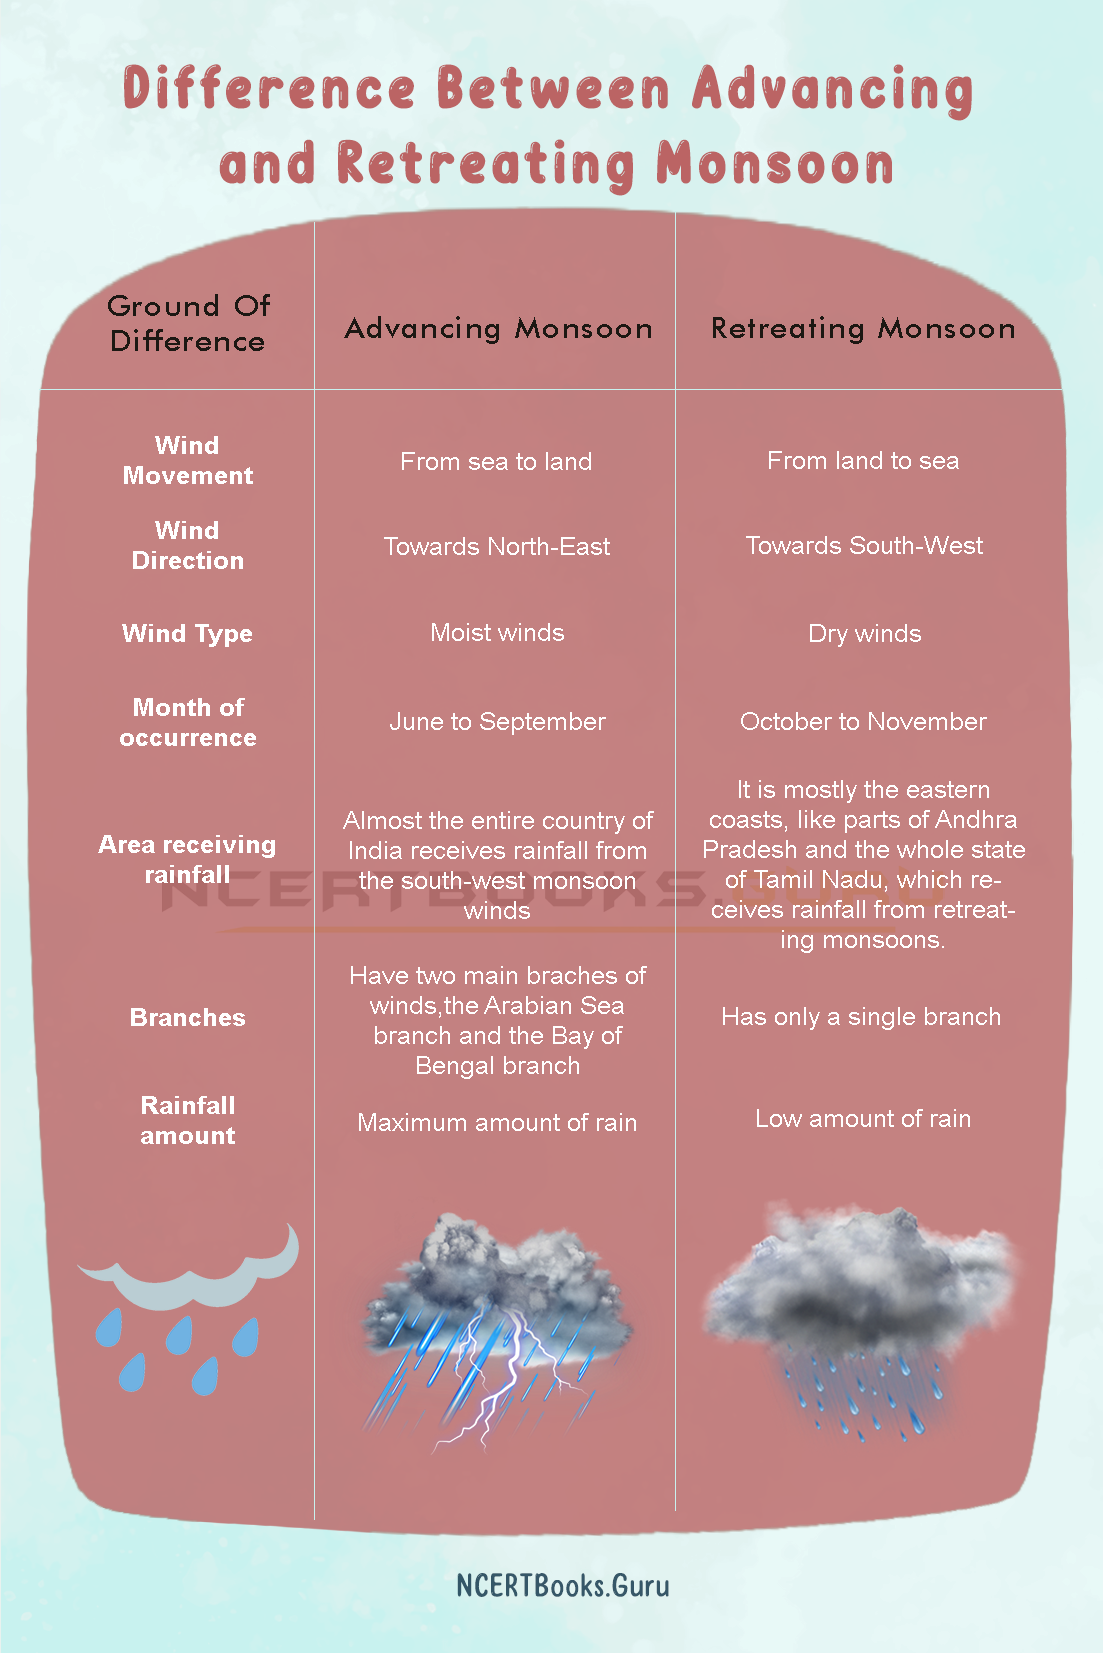 Difference Between Advancing and Retreating Monsoon 2